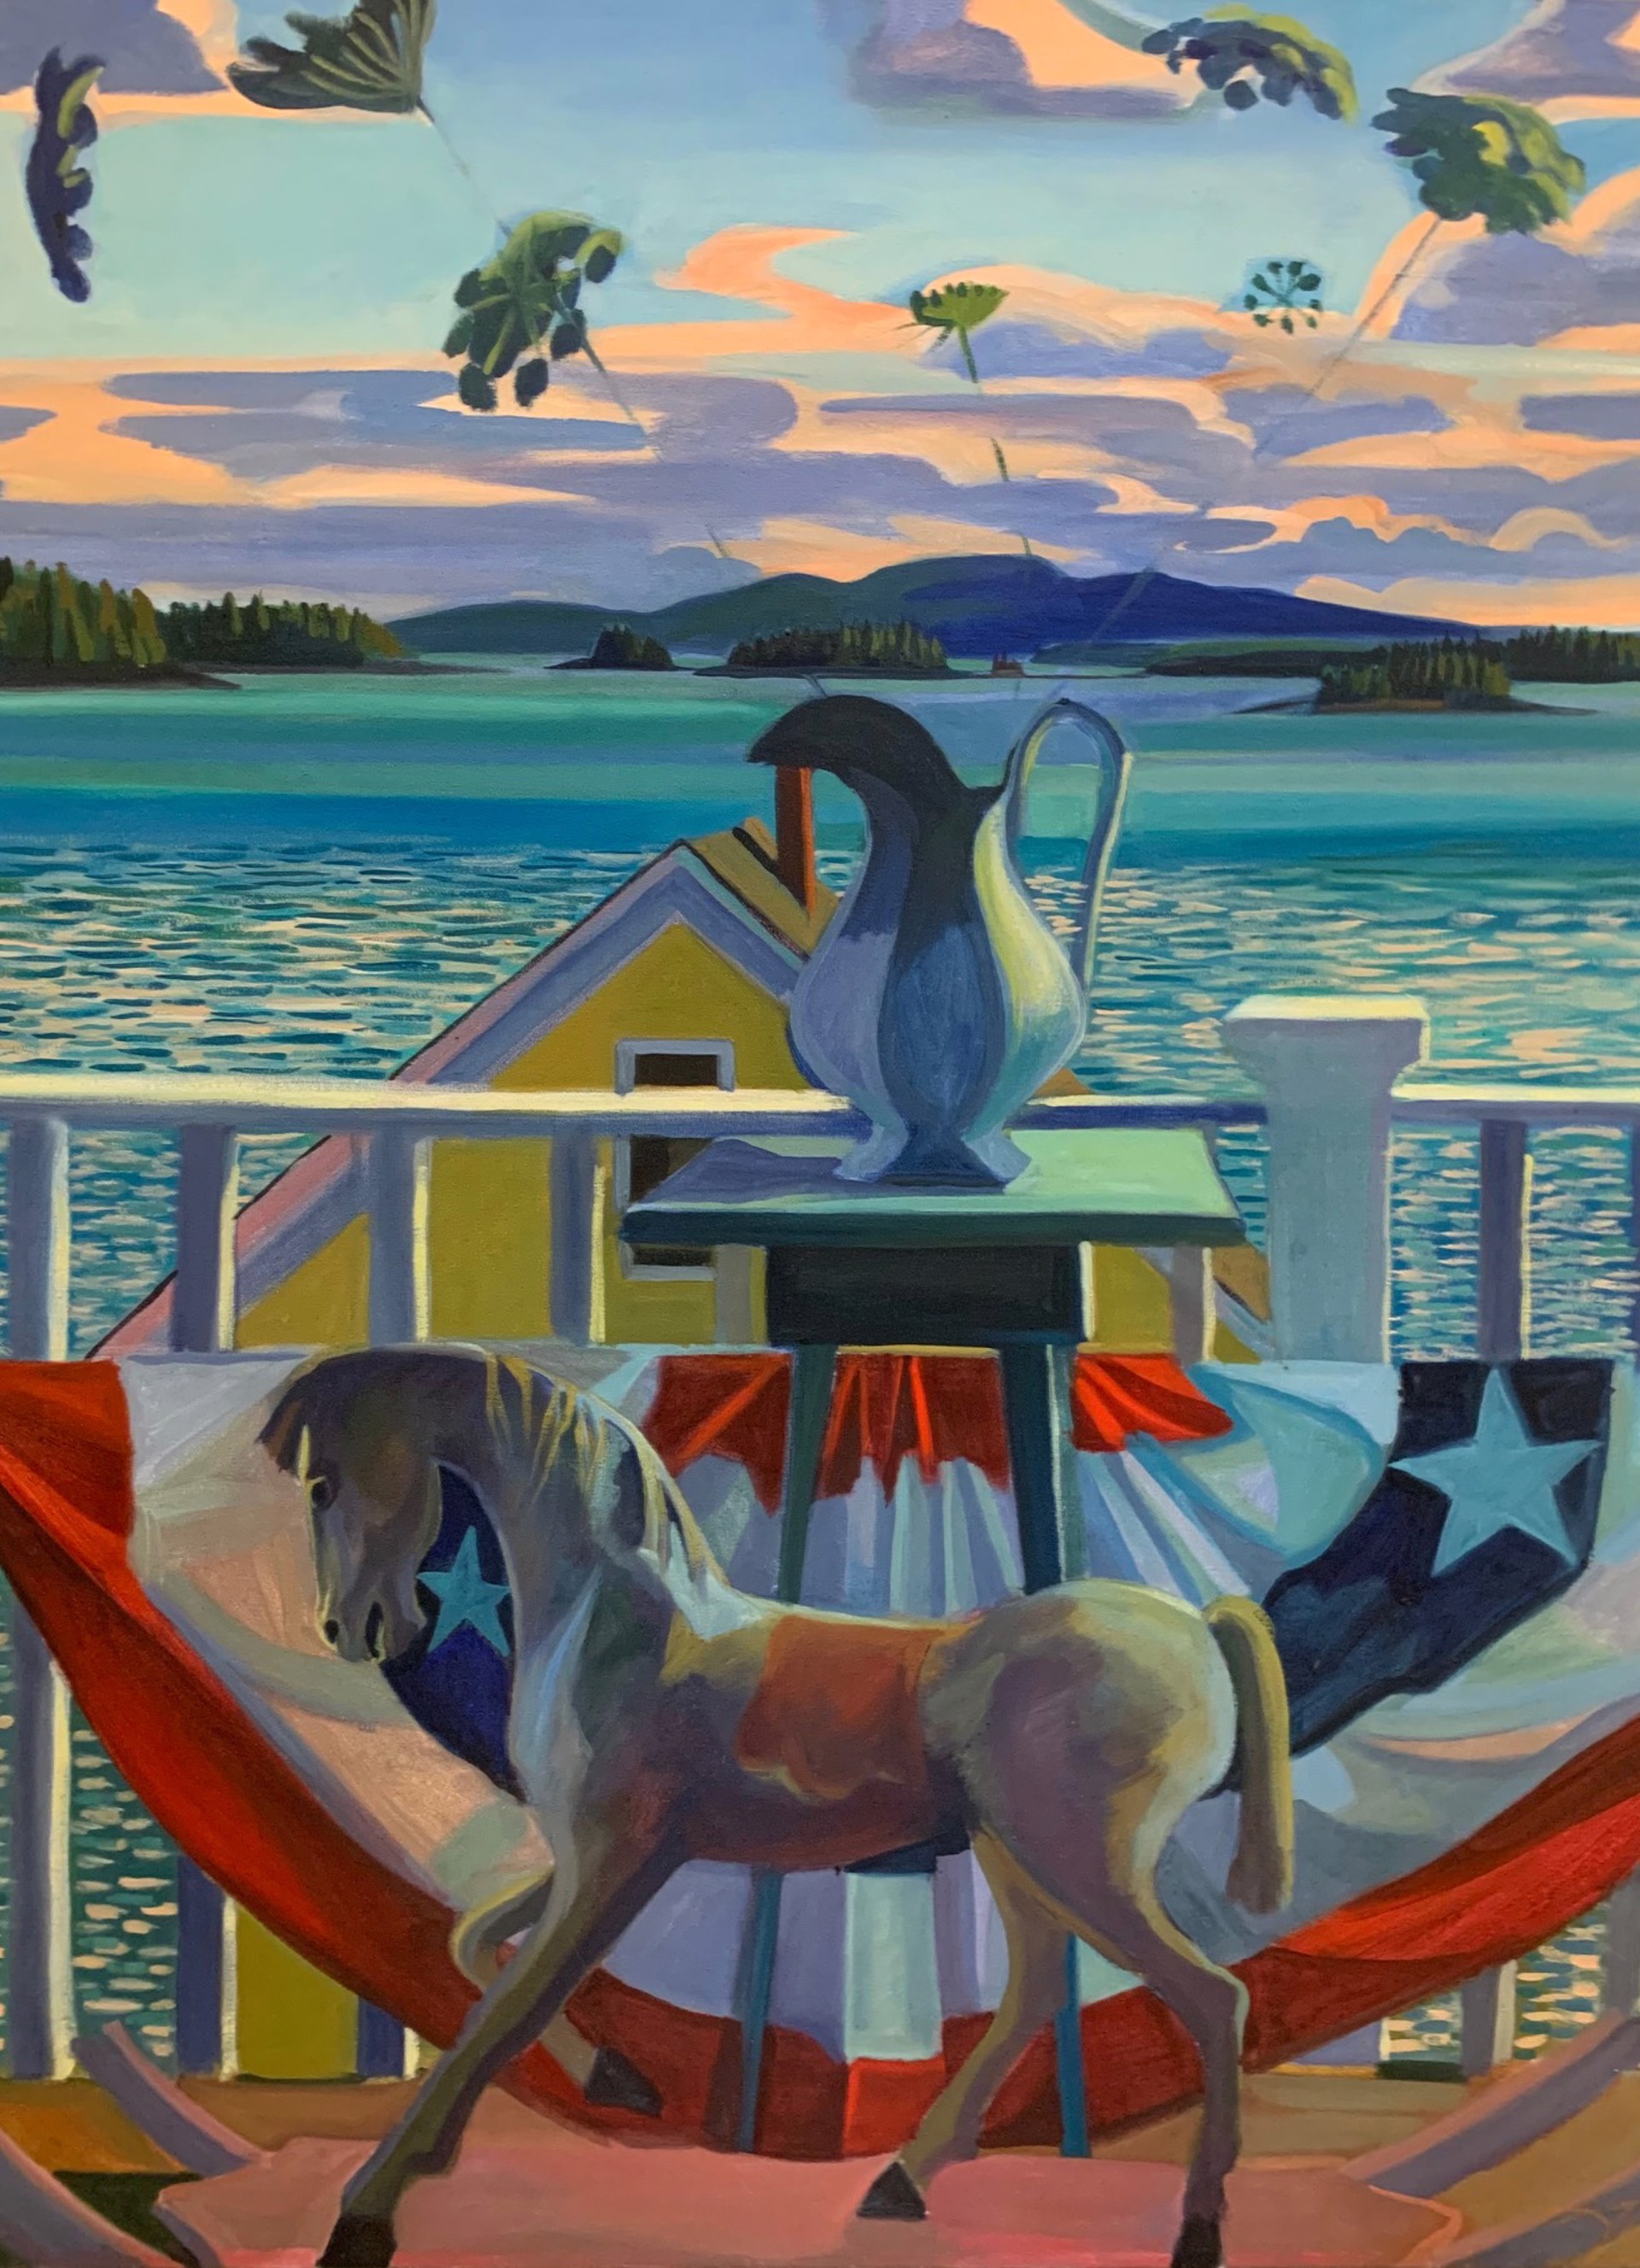 Rocking Horse on the Bay by Jill Hoy